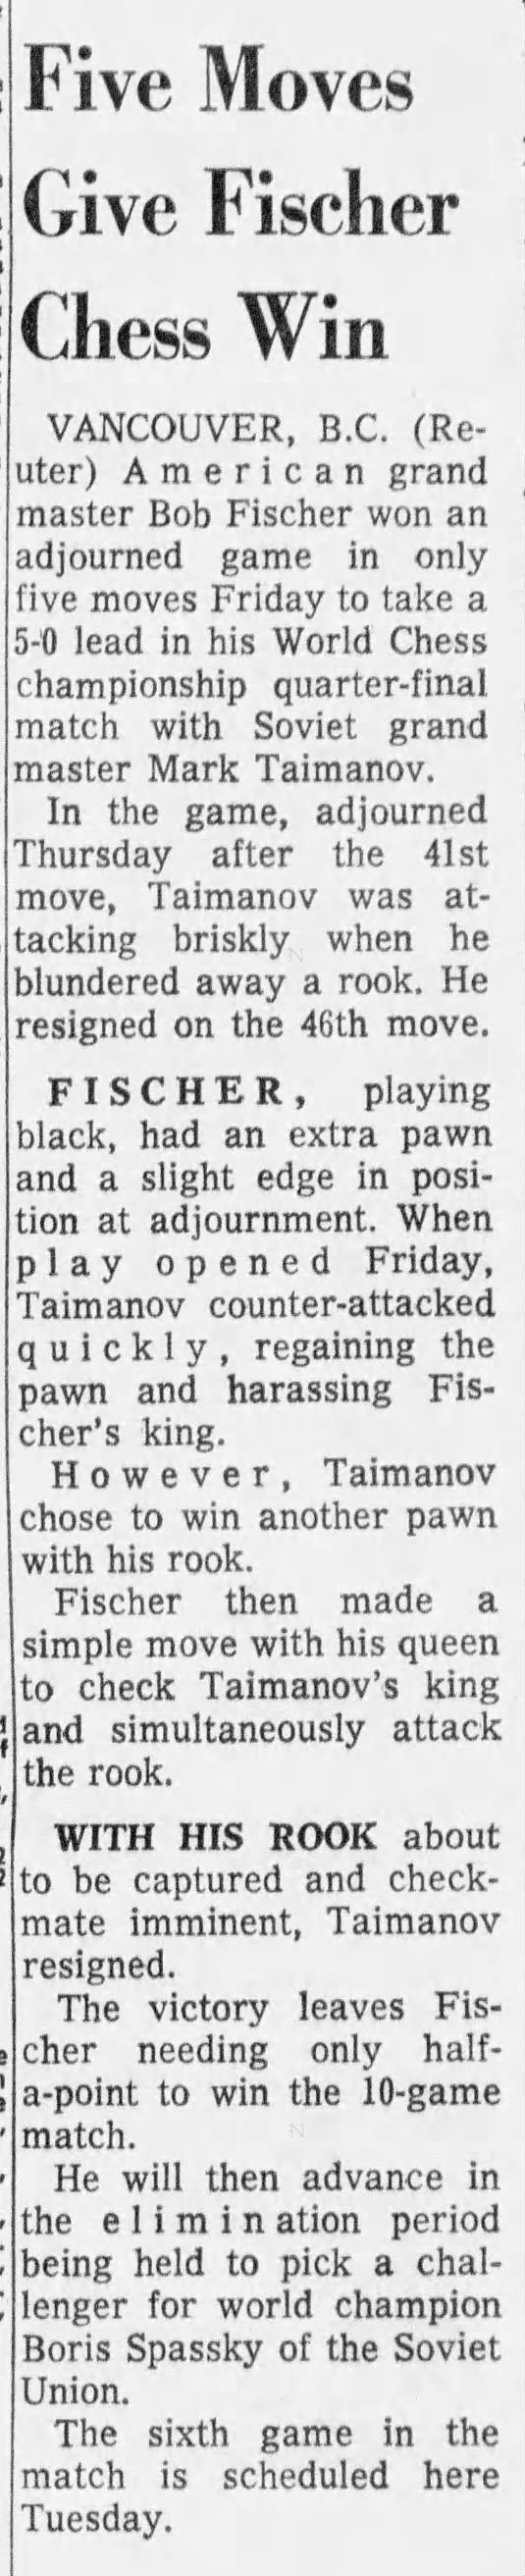 Five Moves Give Fischer Chess Win